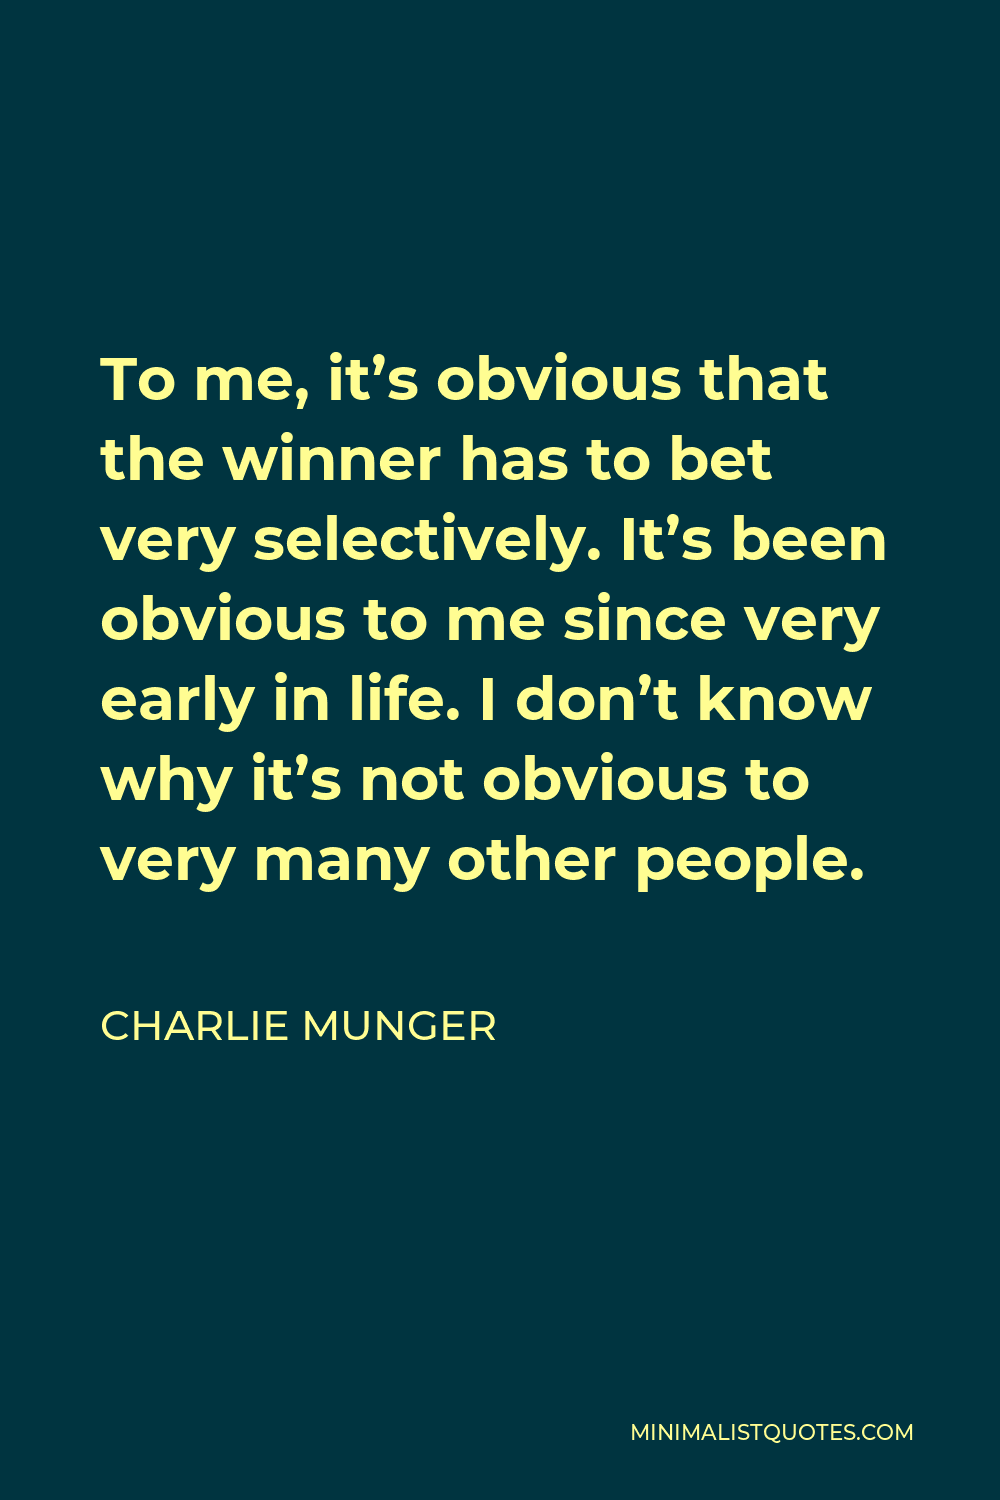 Charlie Munger Quote - To me, it’s obvious that the winner has to bet very selectively. It’s been obvious to me since very early in life. I don’t know why it’s not obvious to very many other people.